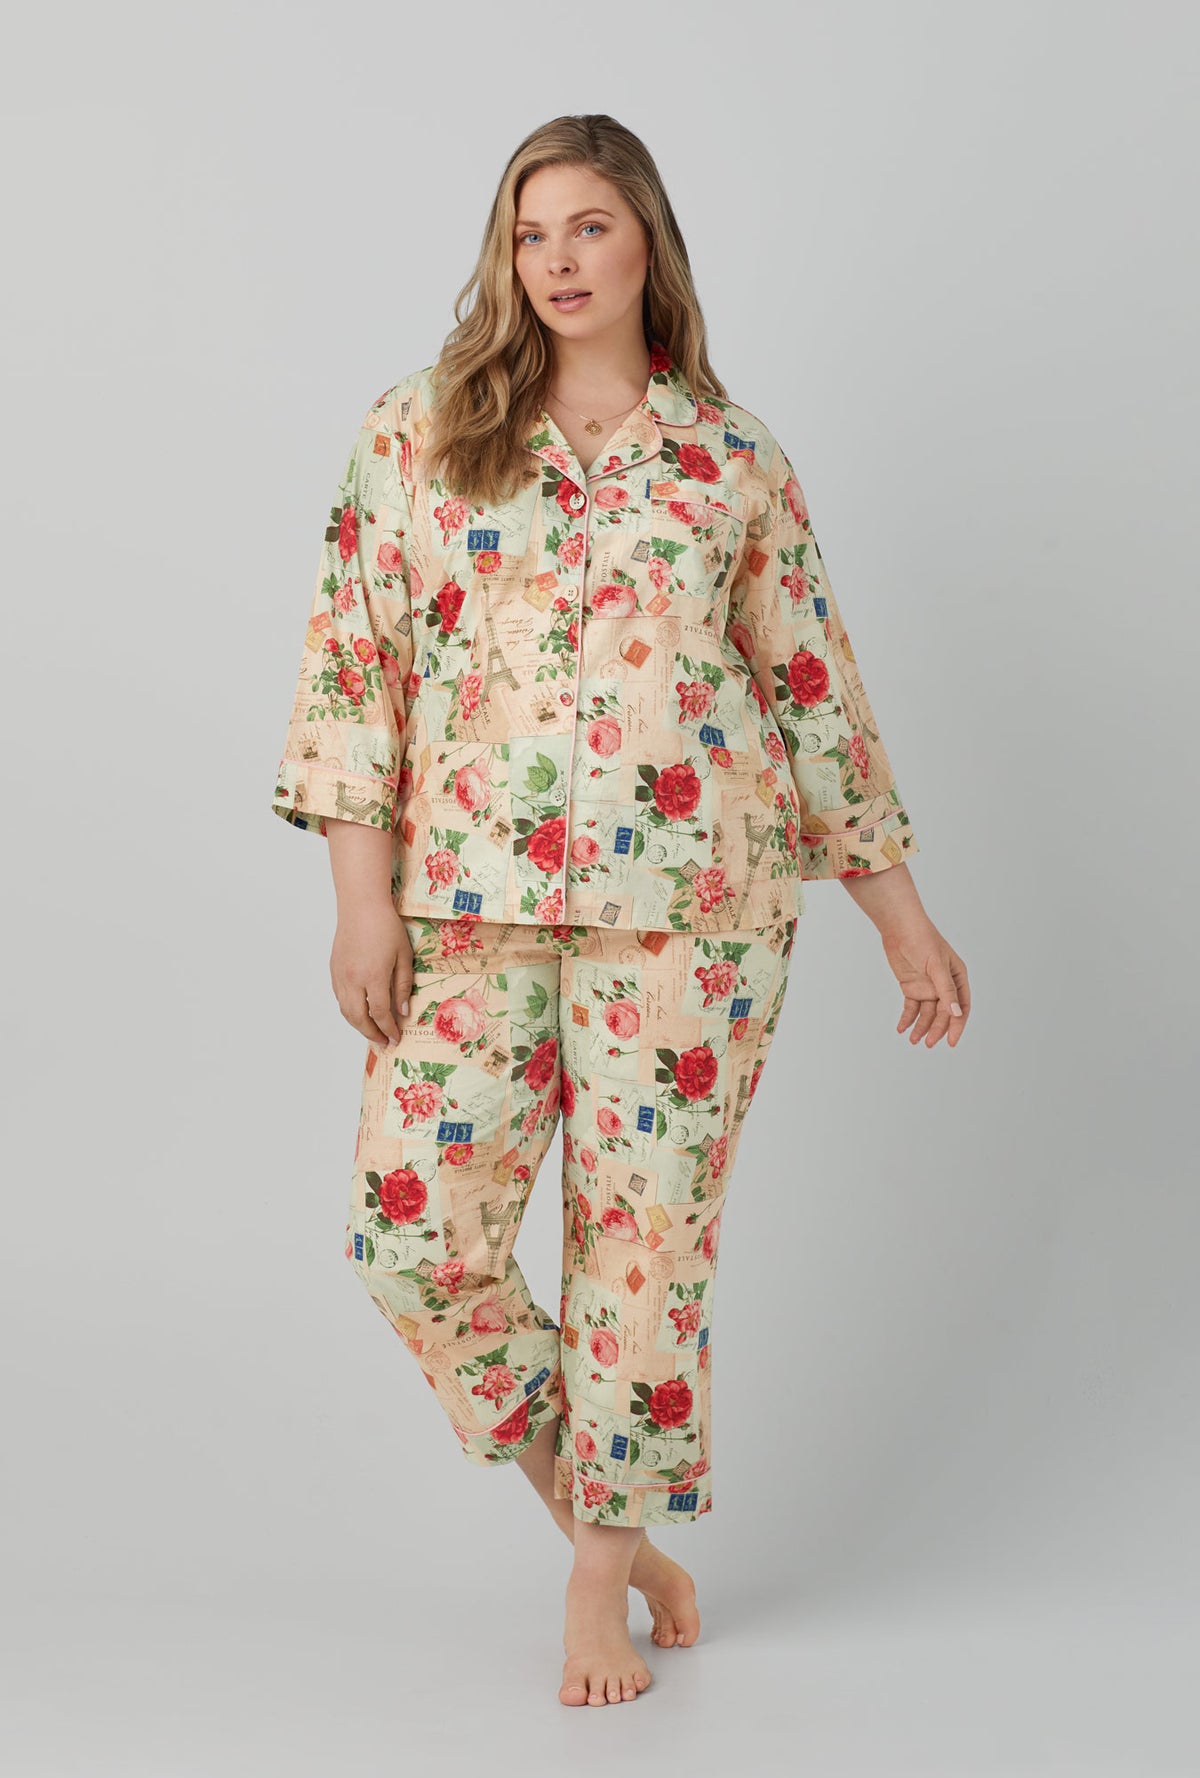 A lady wearing 3/4 Sleeve Classic Woven Cotton Poplin Cropped PJ Set with Love Notes print